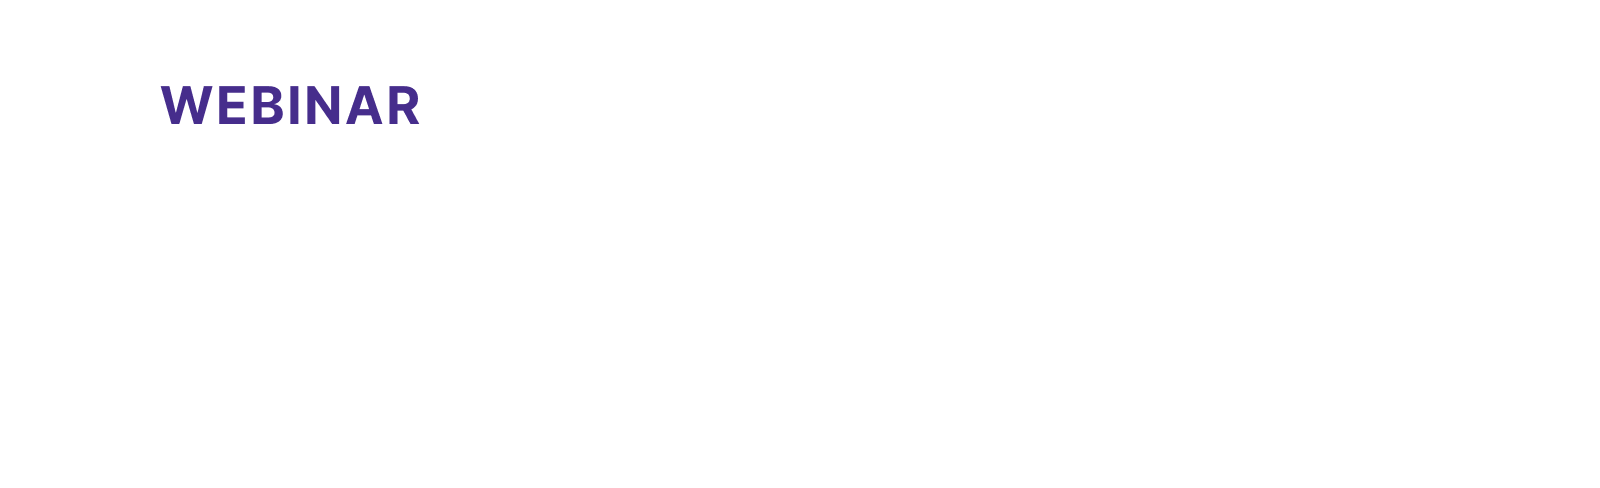 Fire Up Your Funnel With Video